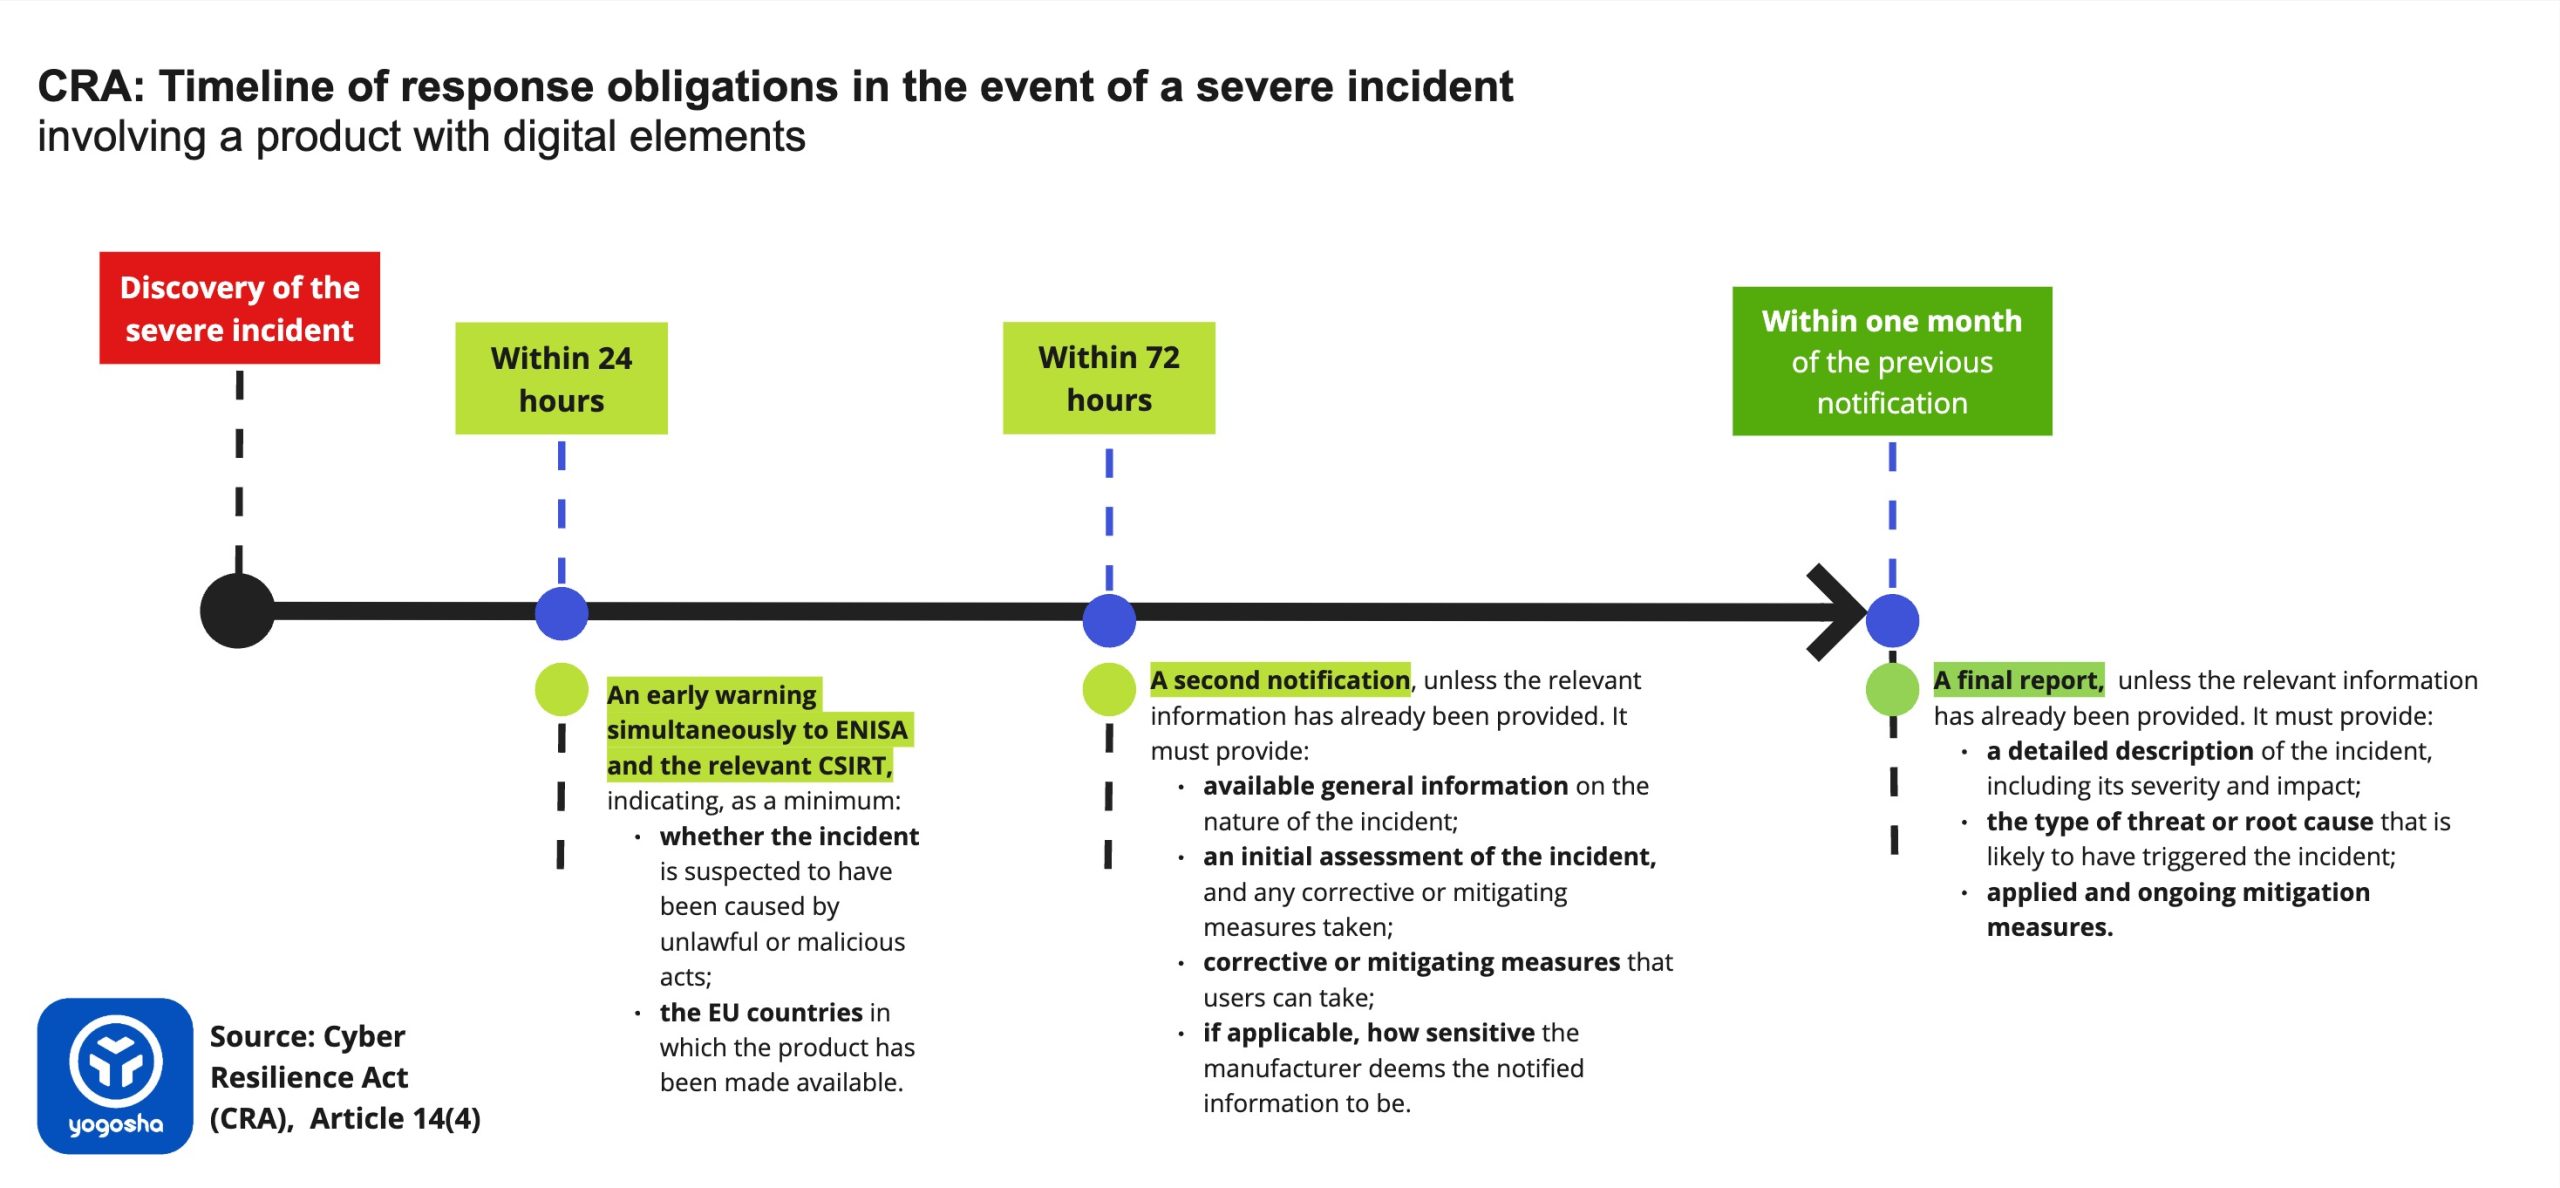 CRA - Timeline of response obligations in the event of a severe incident involving a product with digital elements